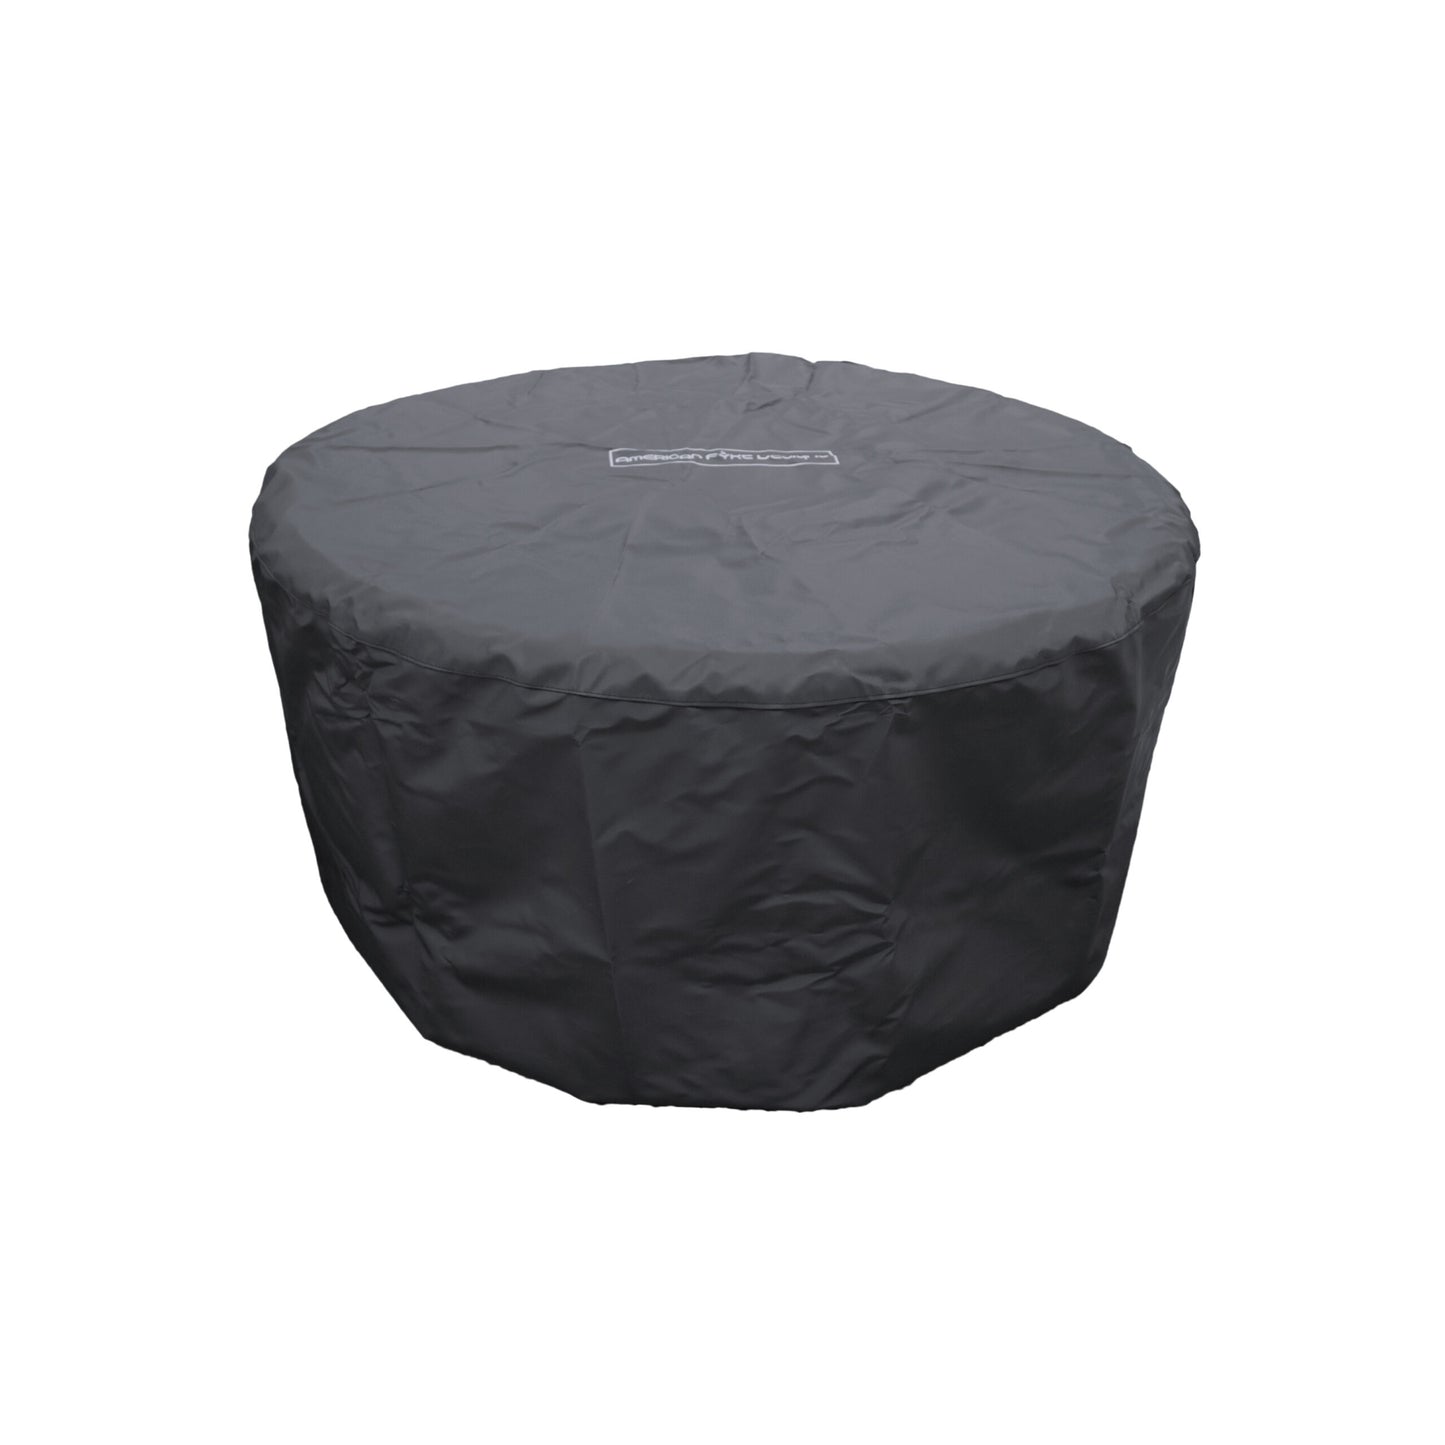 48" American Fyre Designs Round Firepit Cover 8135A